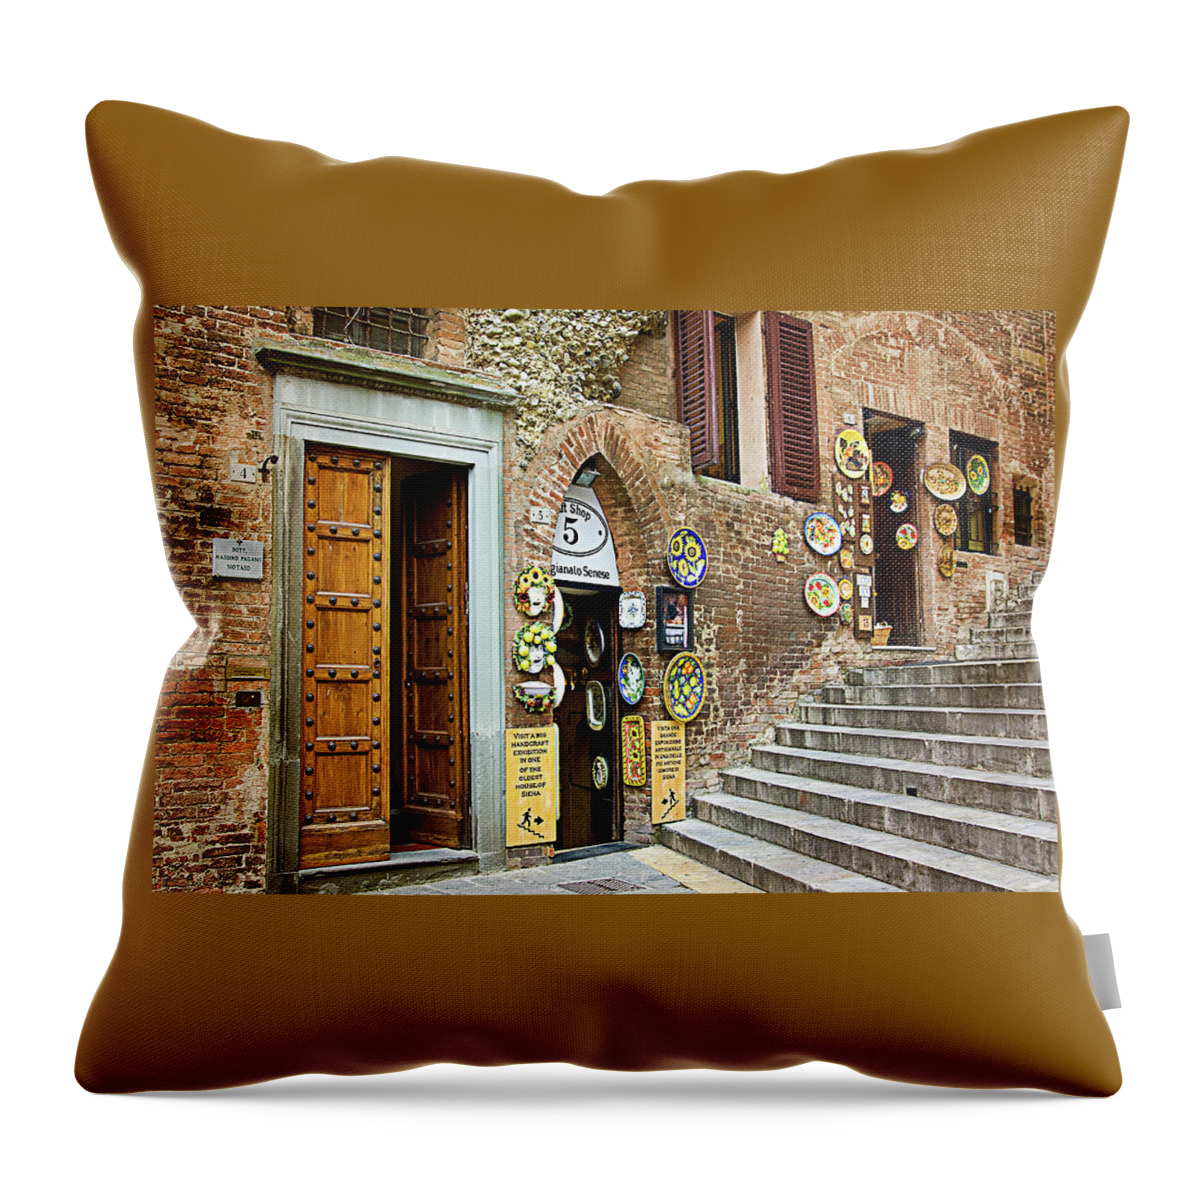 Siena Throw Pillow featuring the photograph Siena Shopping by Jill Love